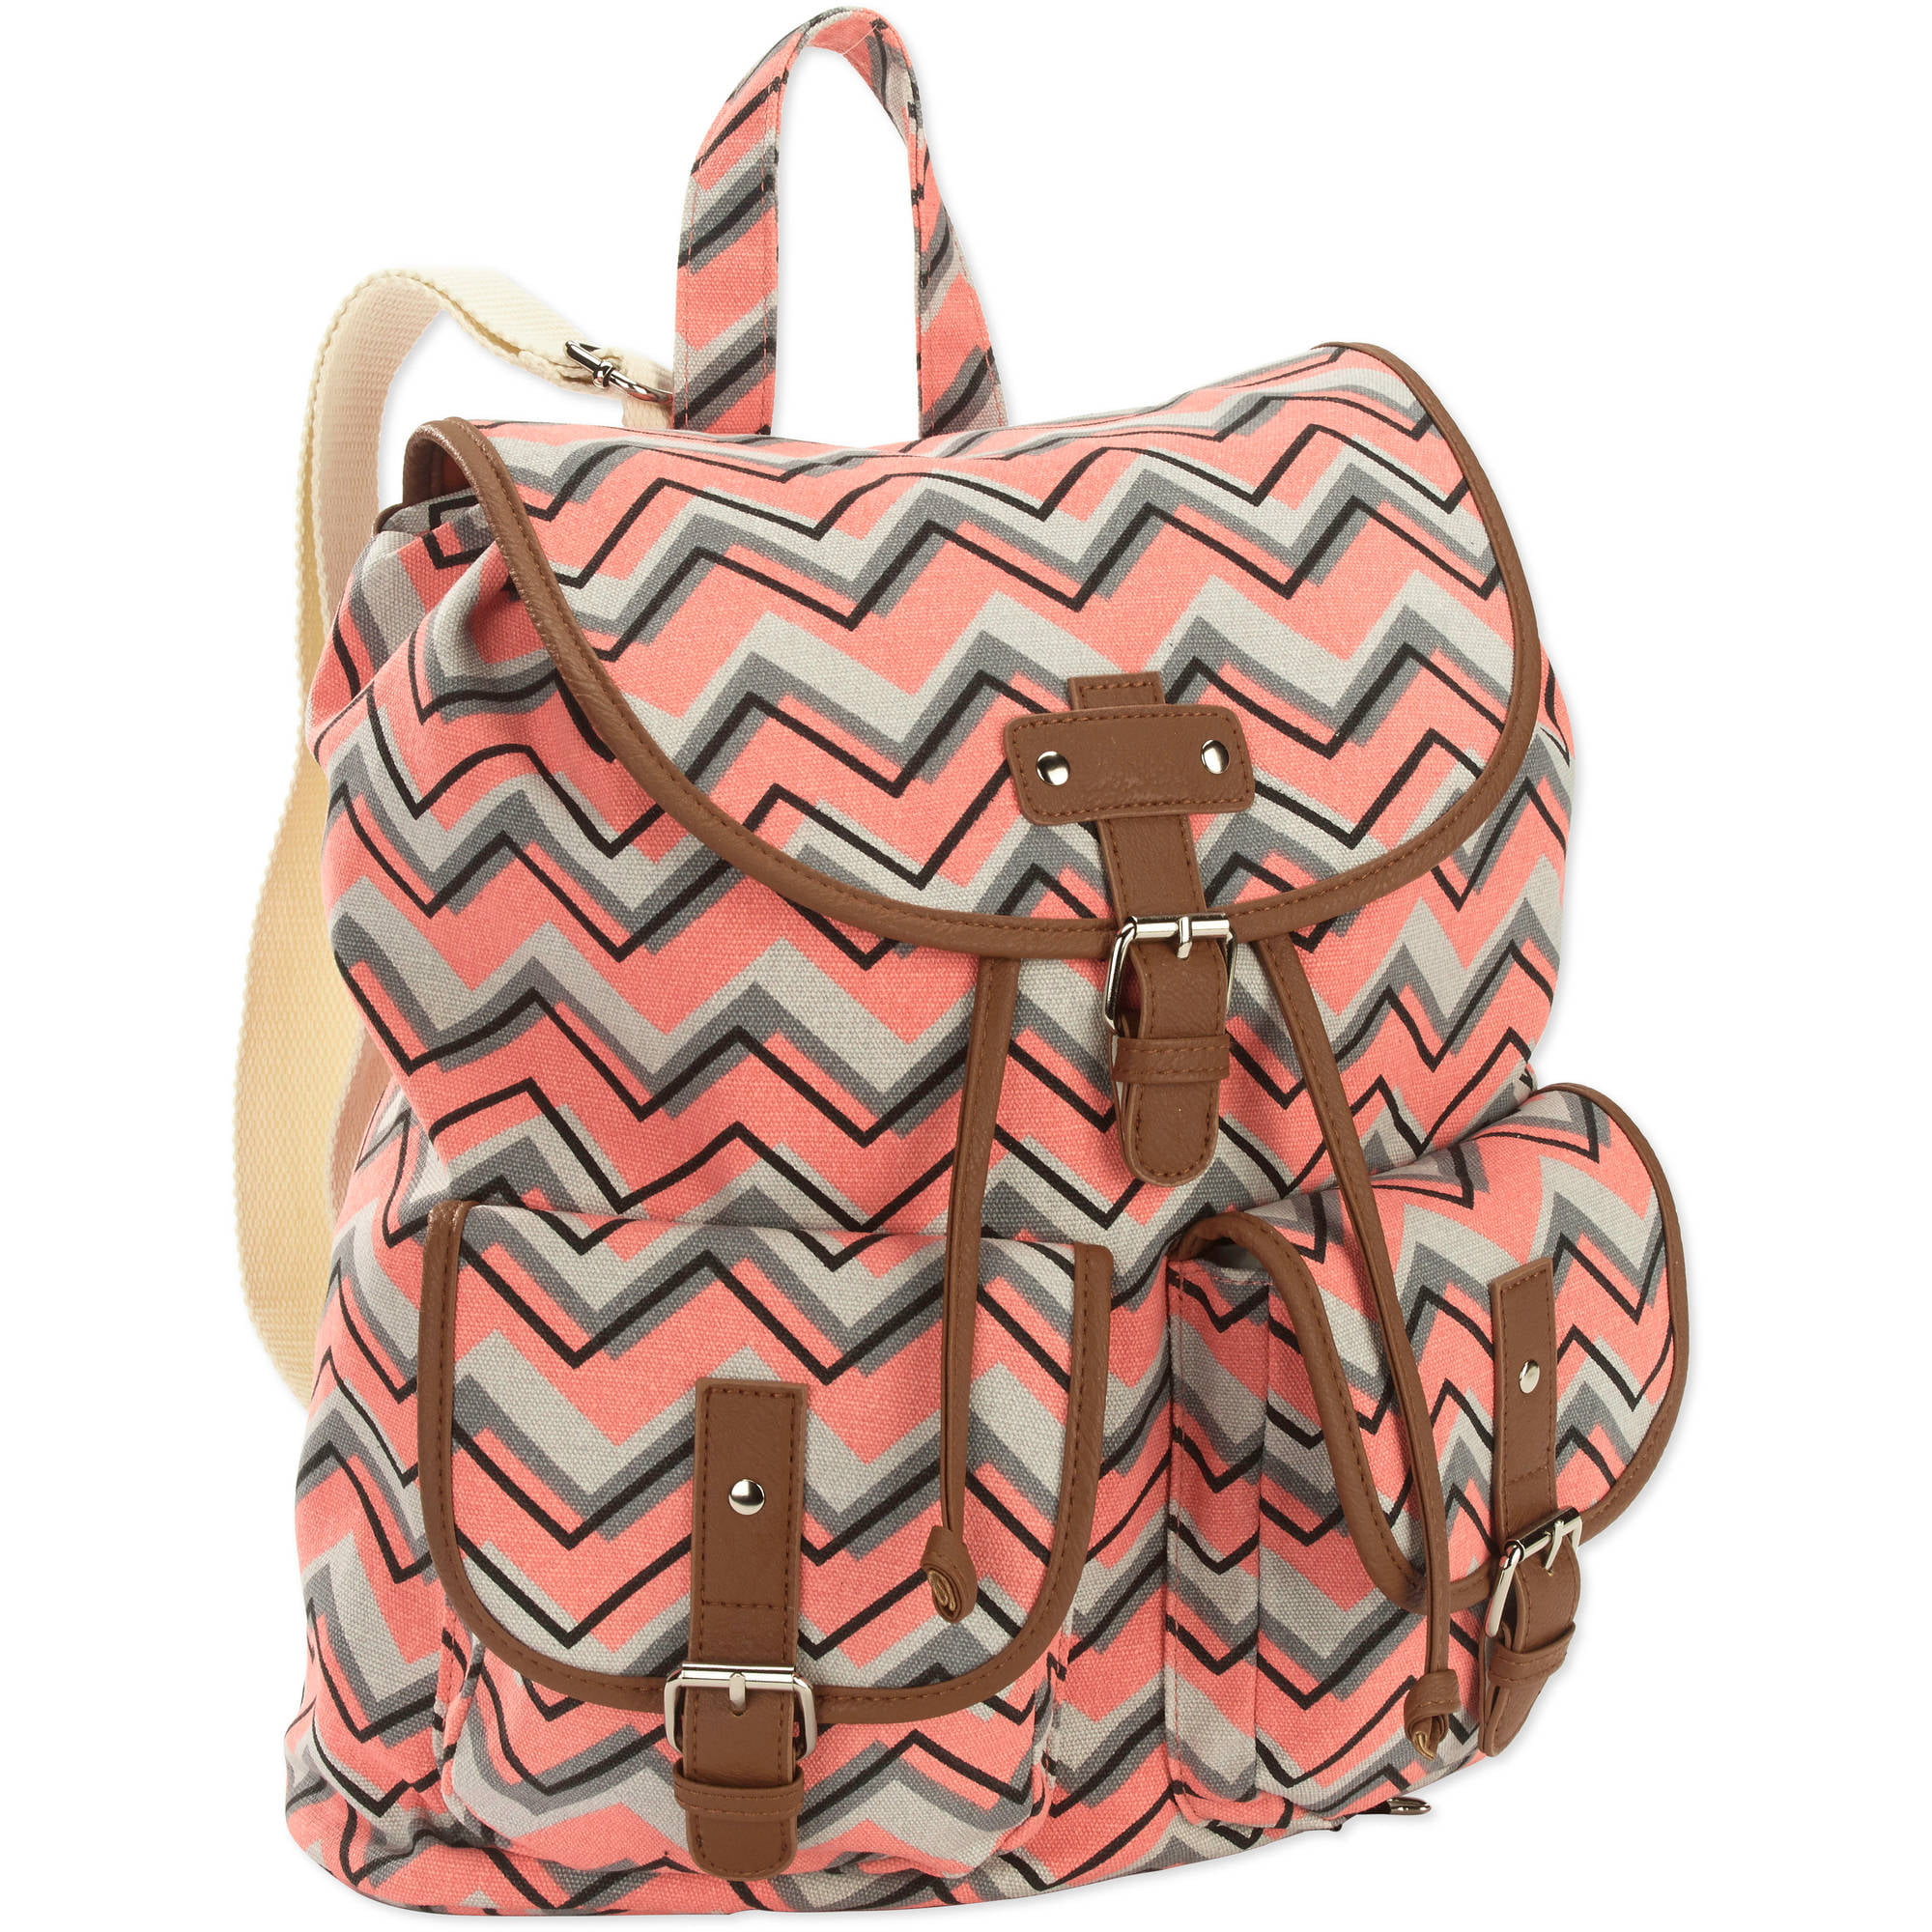 Cora Backpack Small - Wine